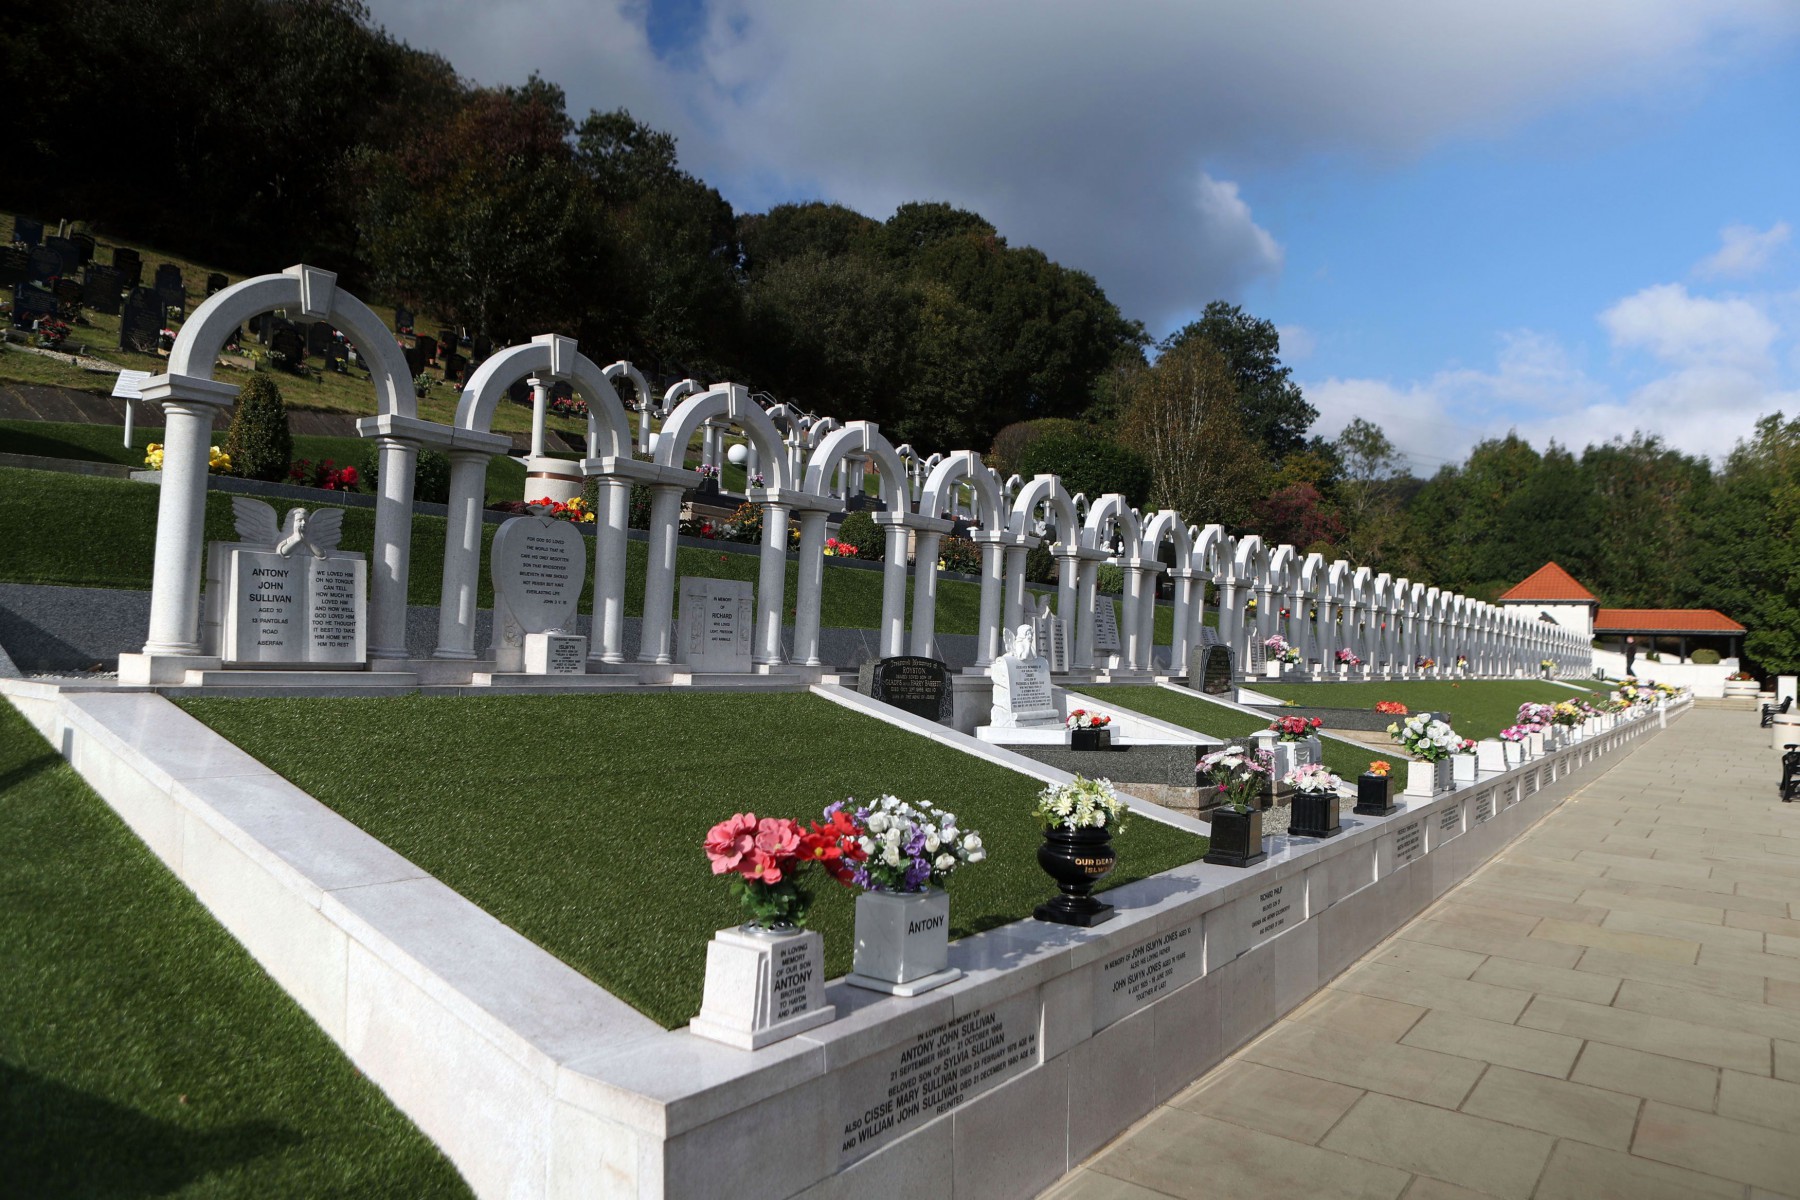 The graves of those who lost their lives still serve as a poignant reminder to the small Welsh village of the tragedy they suffered 